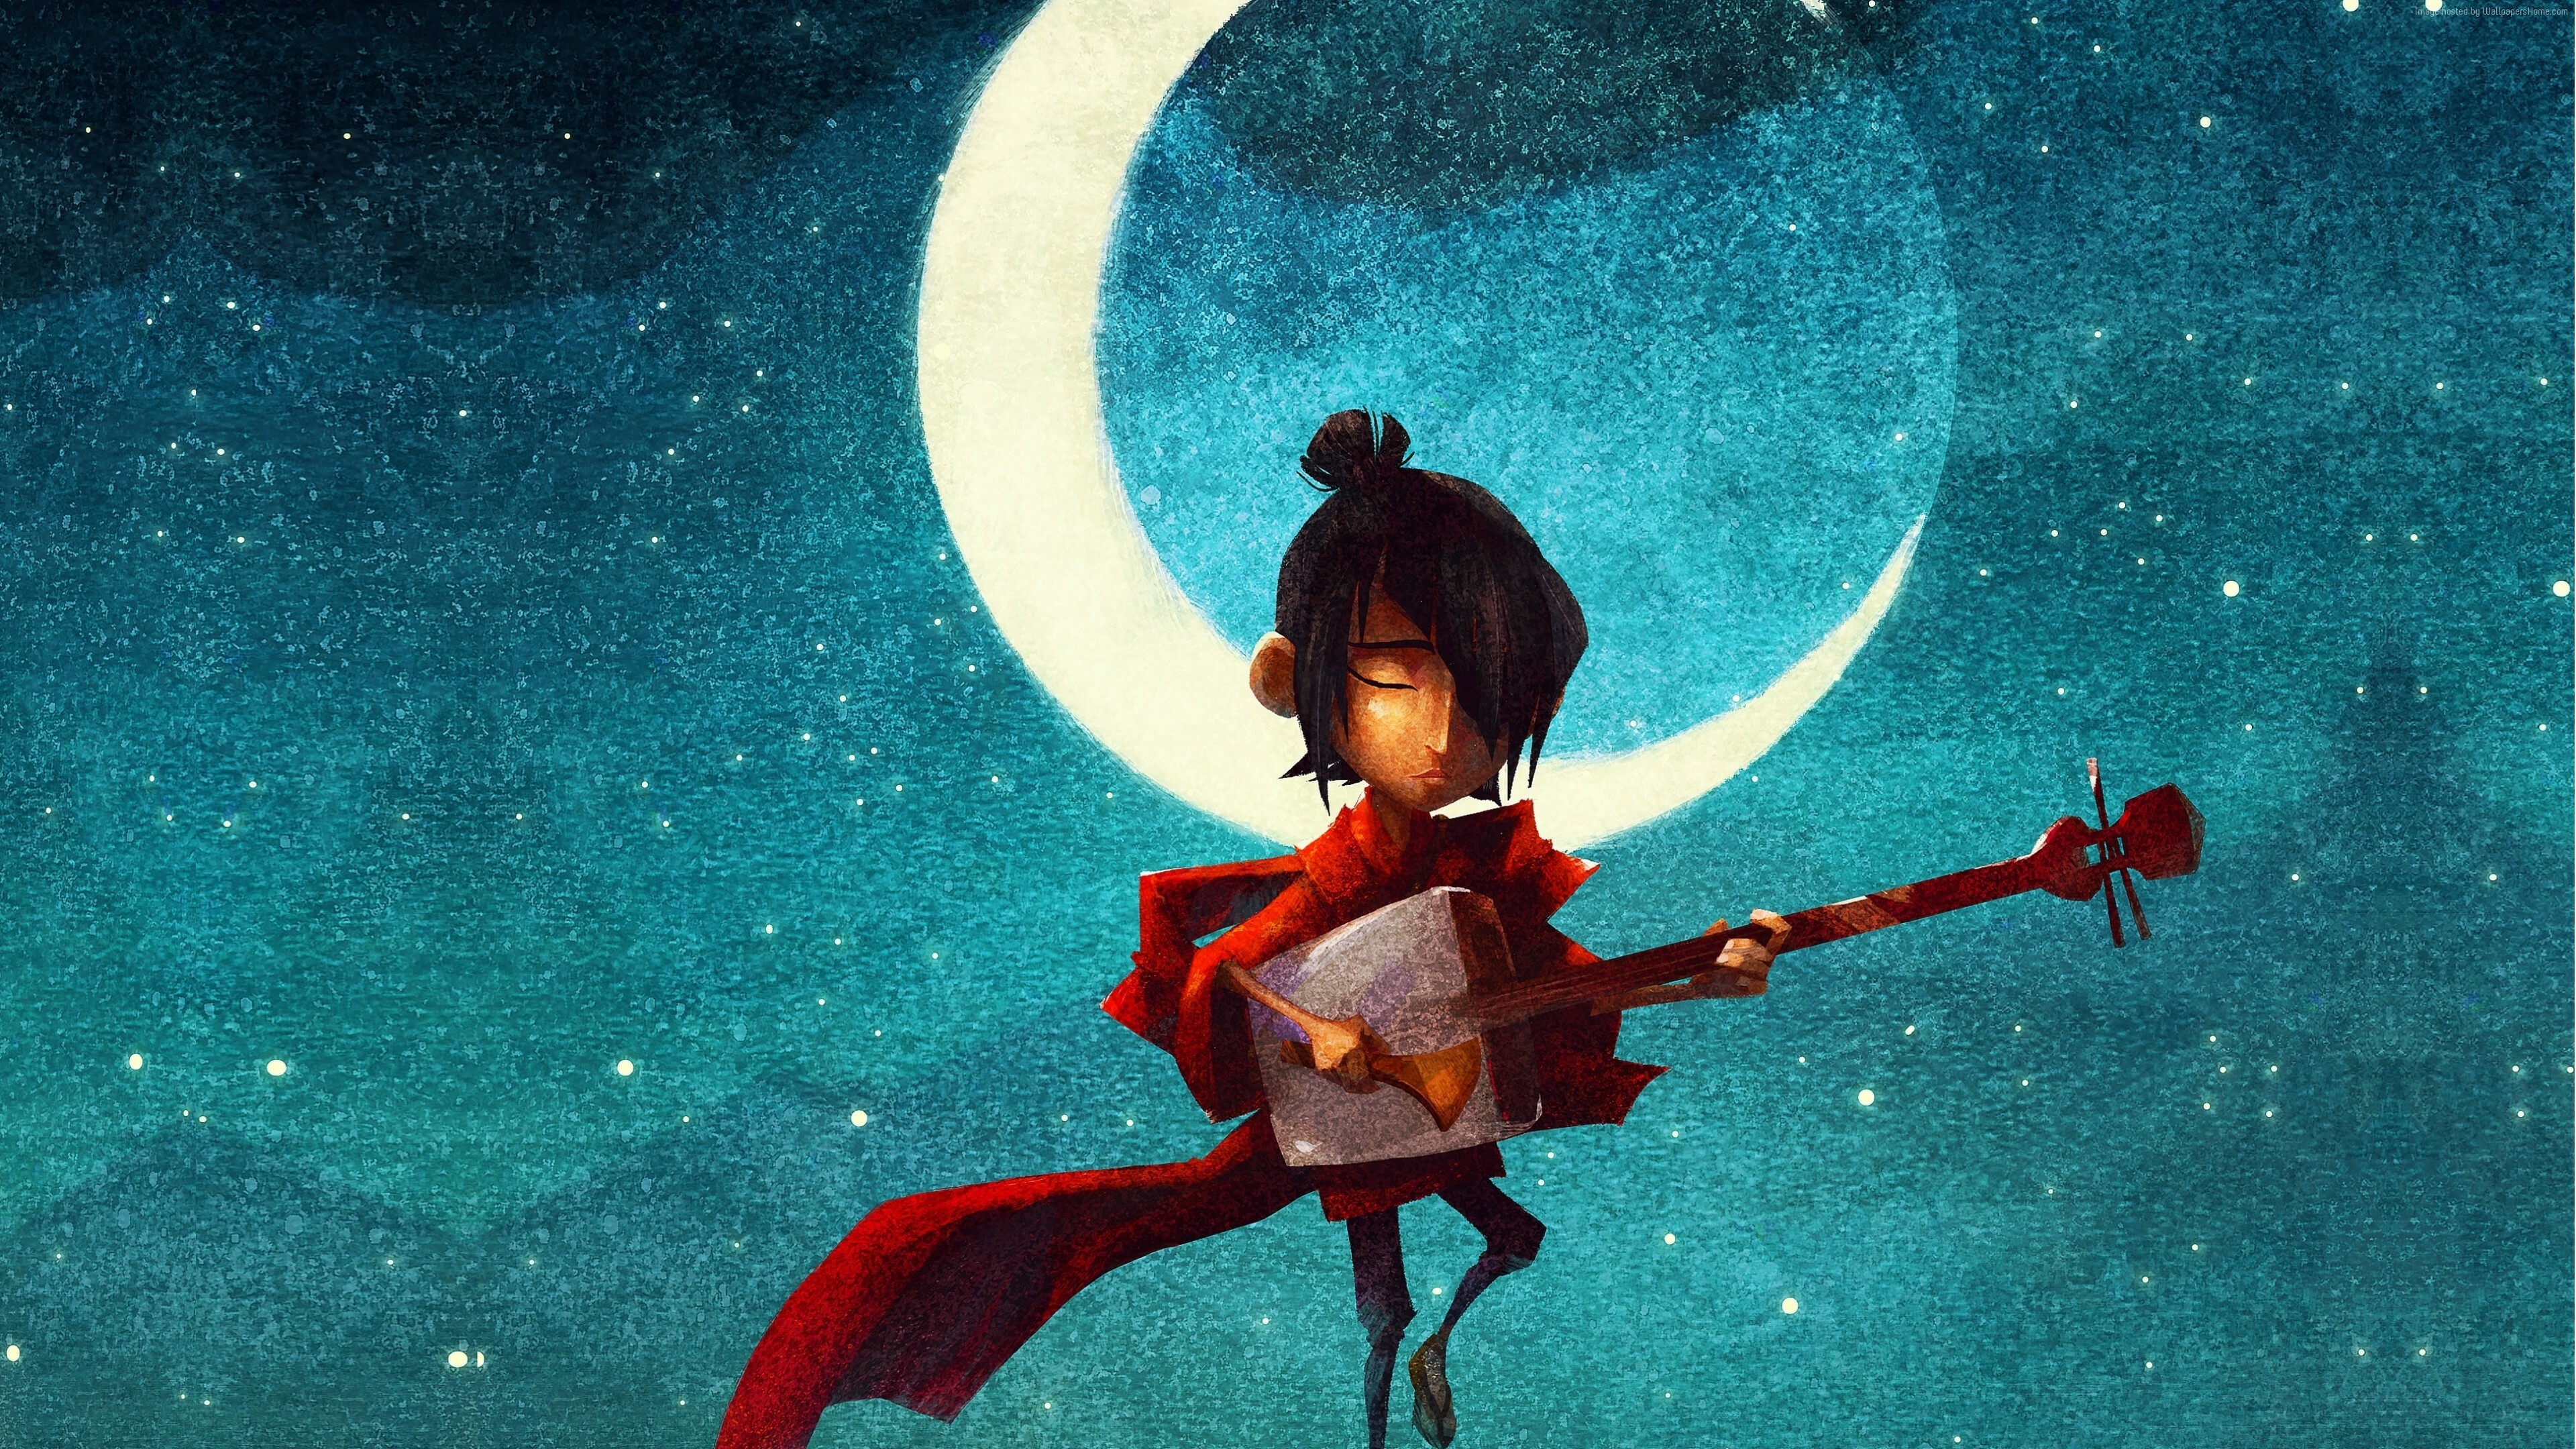 HD wallpaper, Hd Movies, Stunning Wallpapers, Breathtaking Visuals, Desktop 4K Kubo And The Two Strings Background Photo, 3840X2160 4K Desktop, 2016 Kubo And The Two Strings